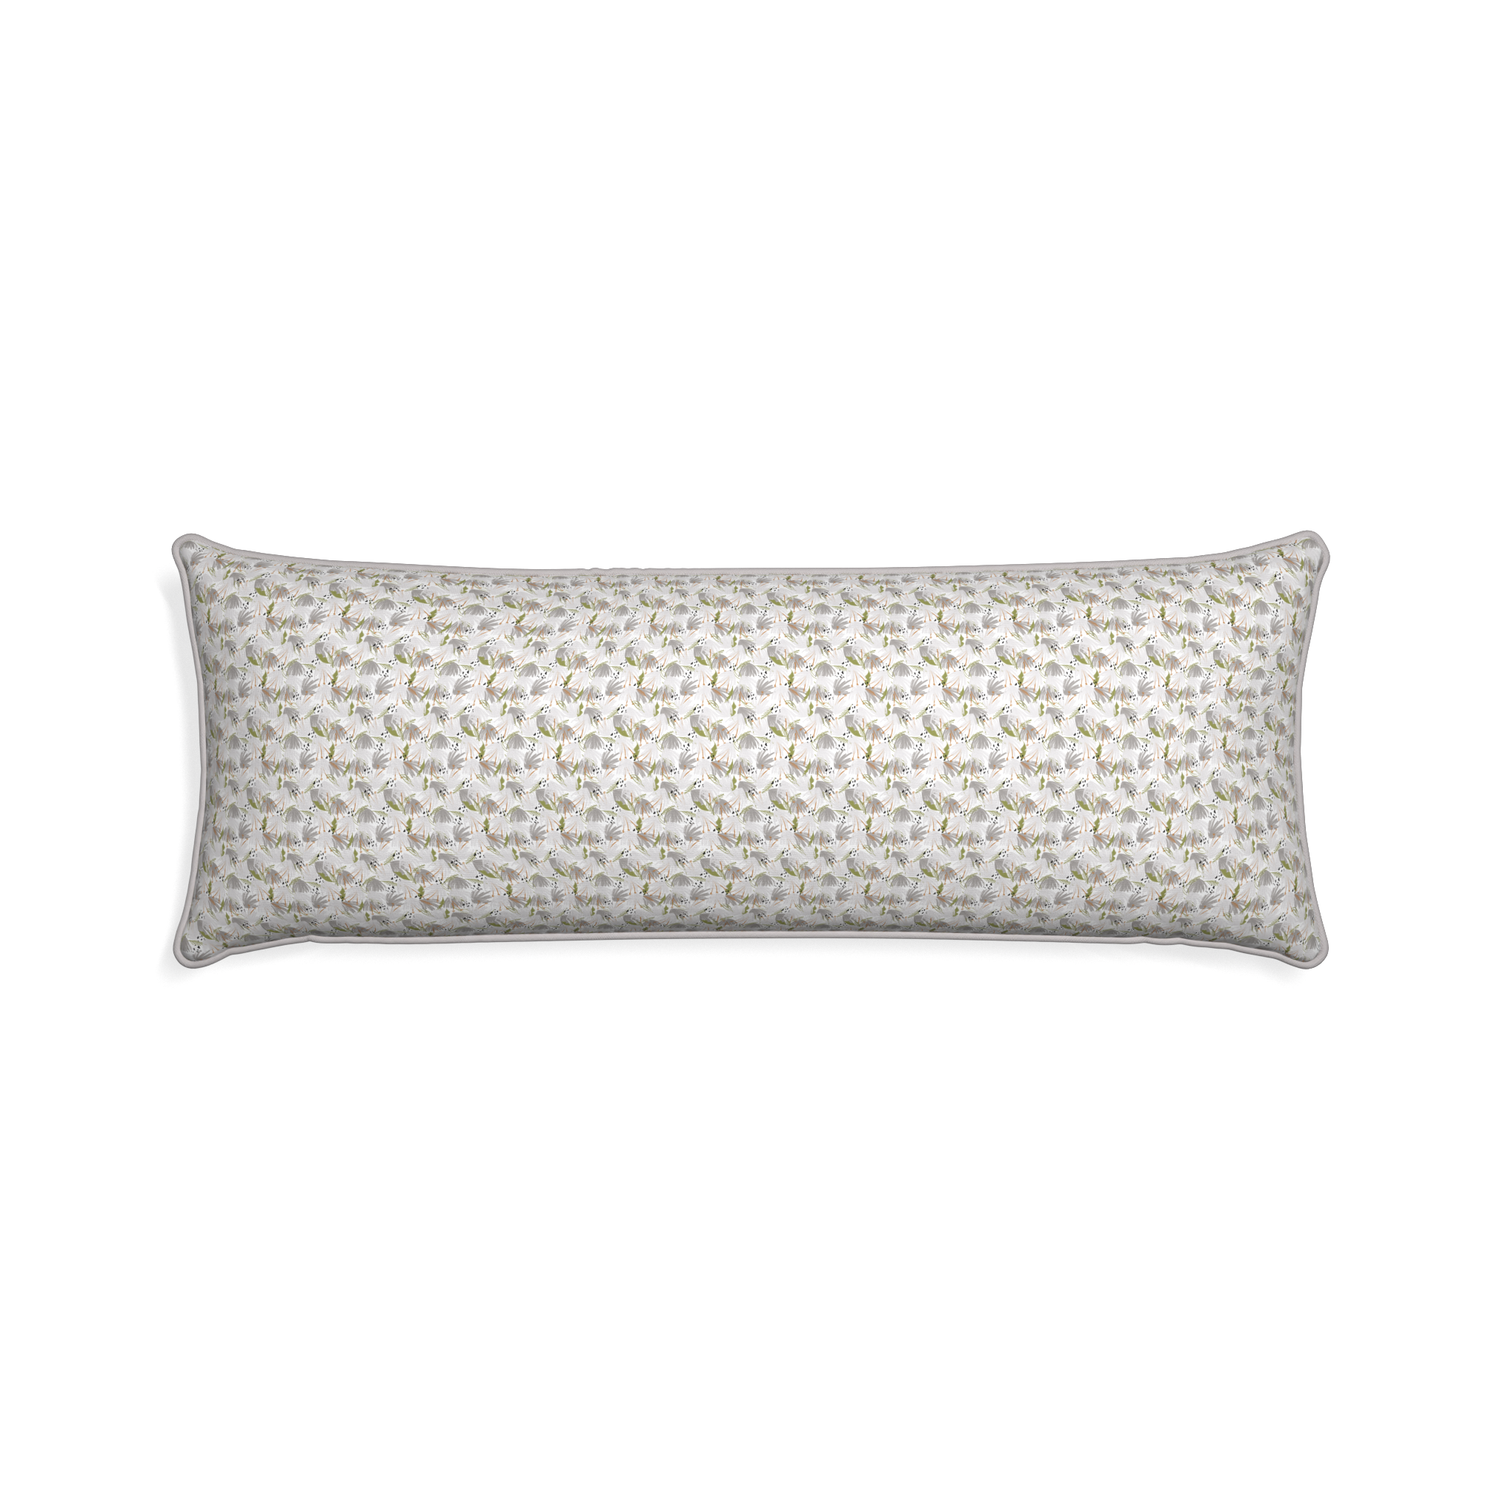 Xl-lumbar eden grey custom grey floralpillow with pebble piping on white background